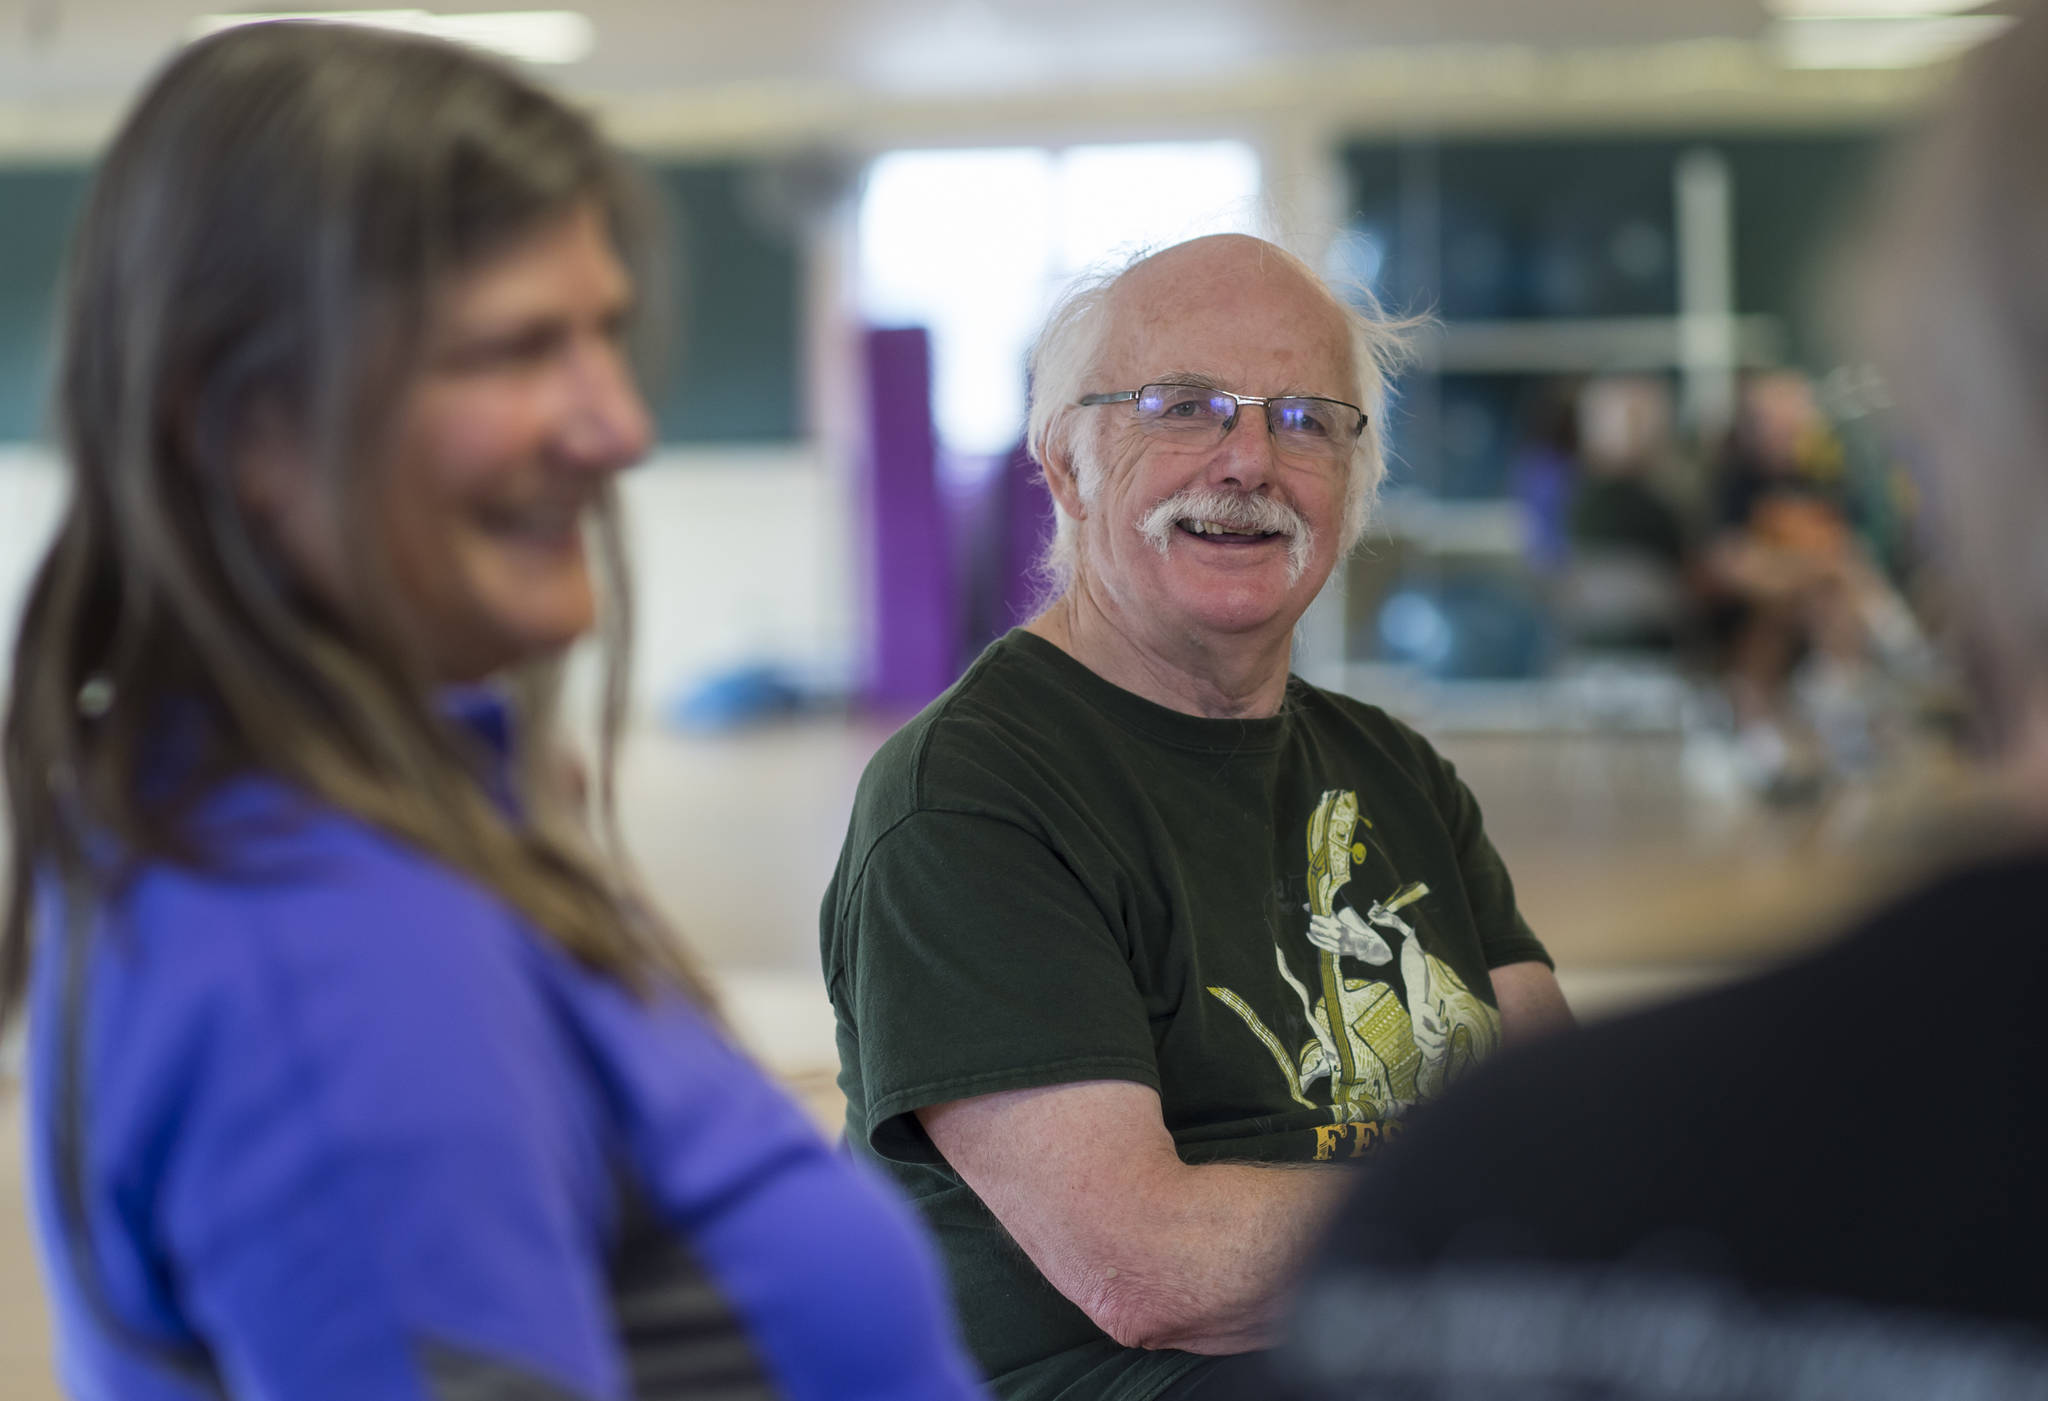 Steve Wolf and his wife, Bev, left, talk with another couple after attending the Rock Steady Boxing Class at Pavitt Health & Fitness on Thursday, April 12, 2018. (Michael Penn | Juneau Empire)